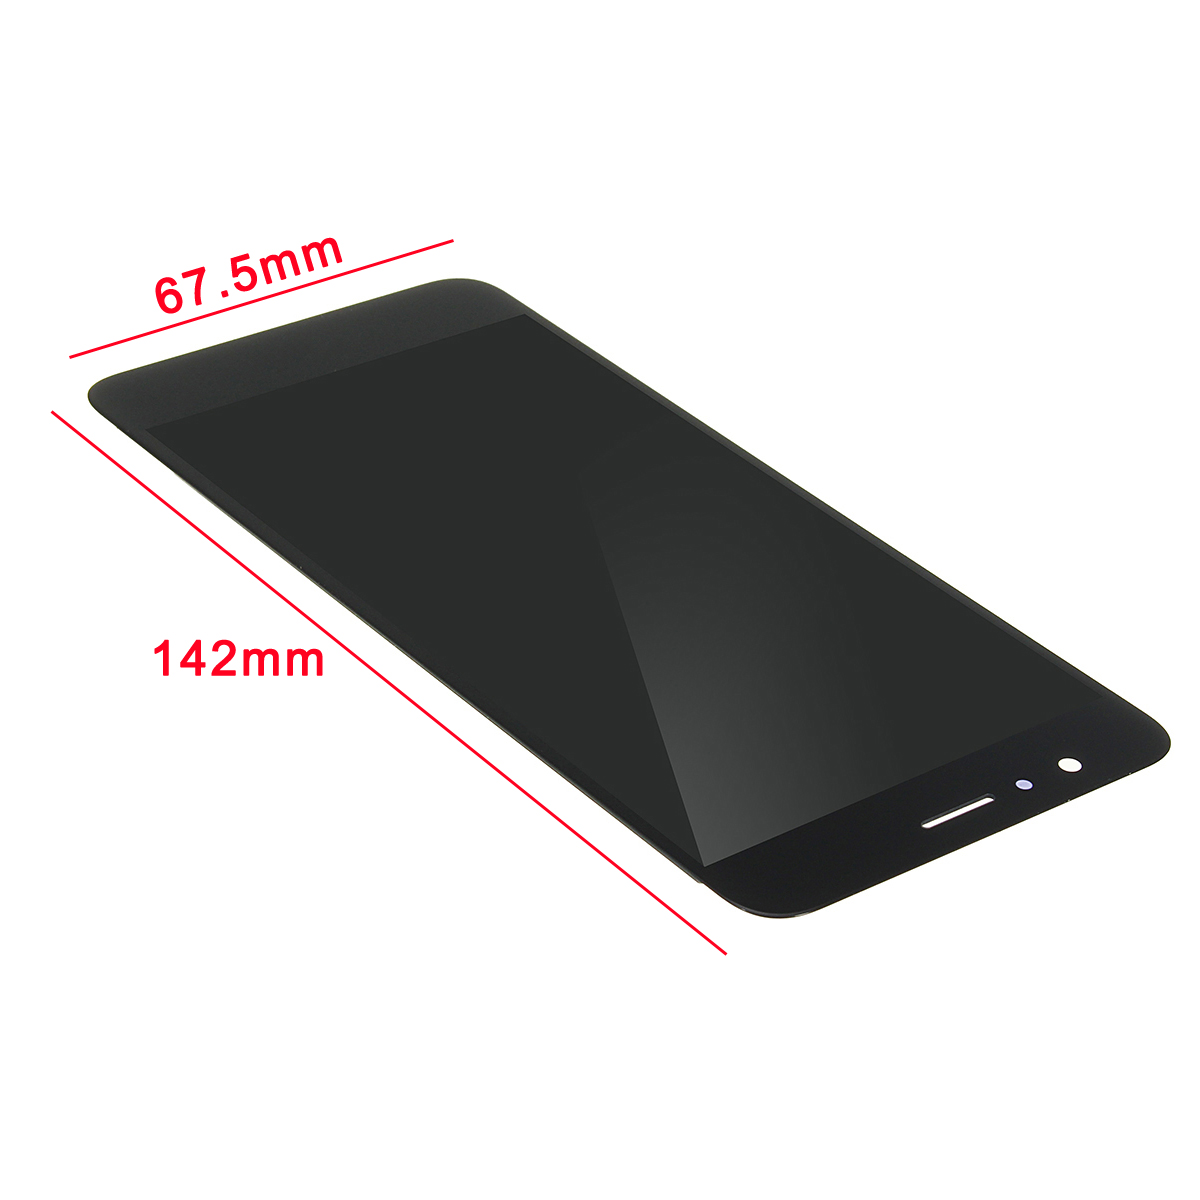 LCD-DisplayTouch-Screen-Digitizer-Assembly-Replacement-With-Tools-For-Huawei-Honor-8-1238995